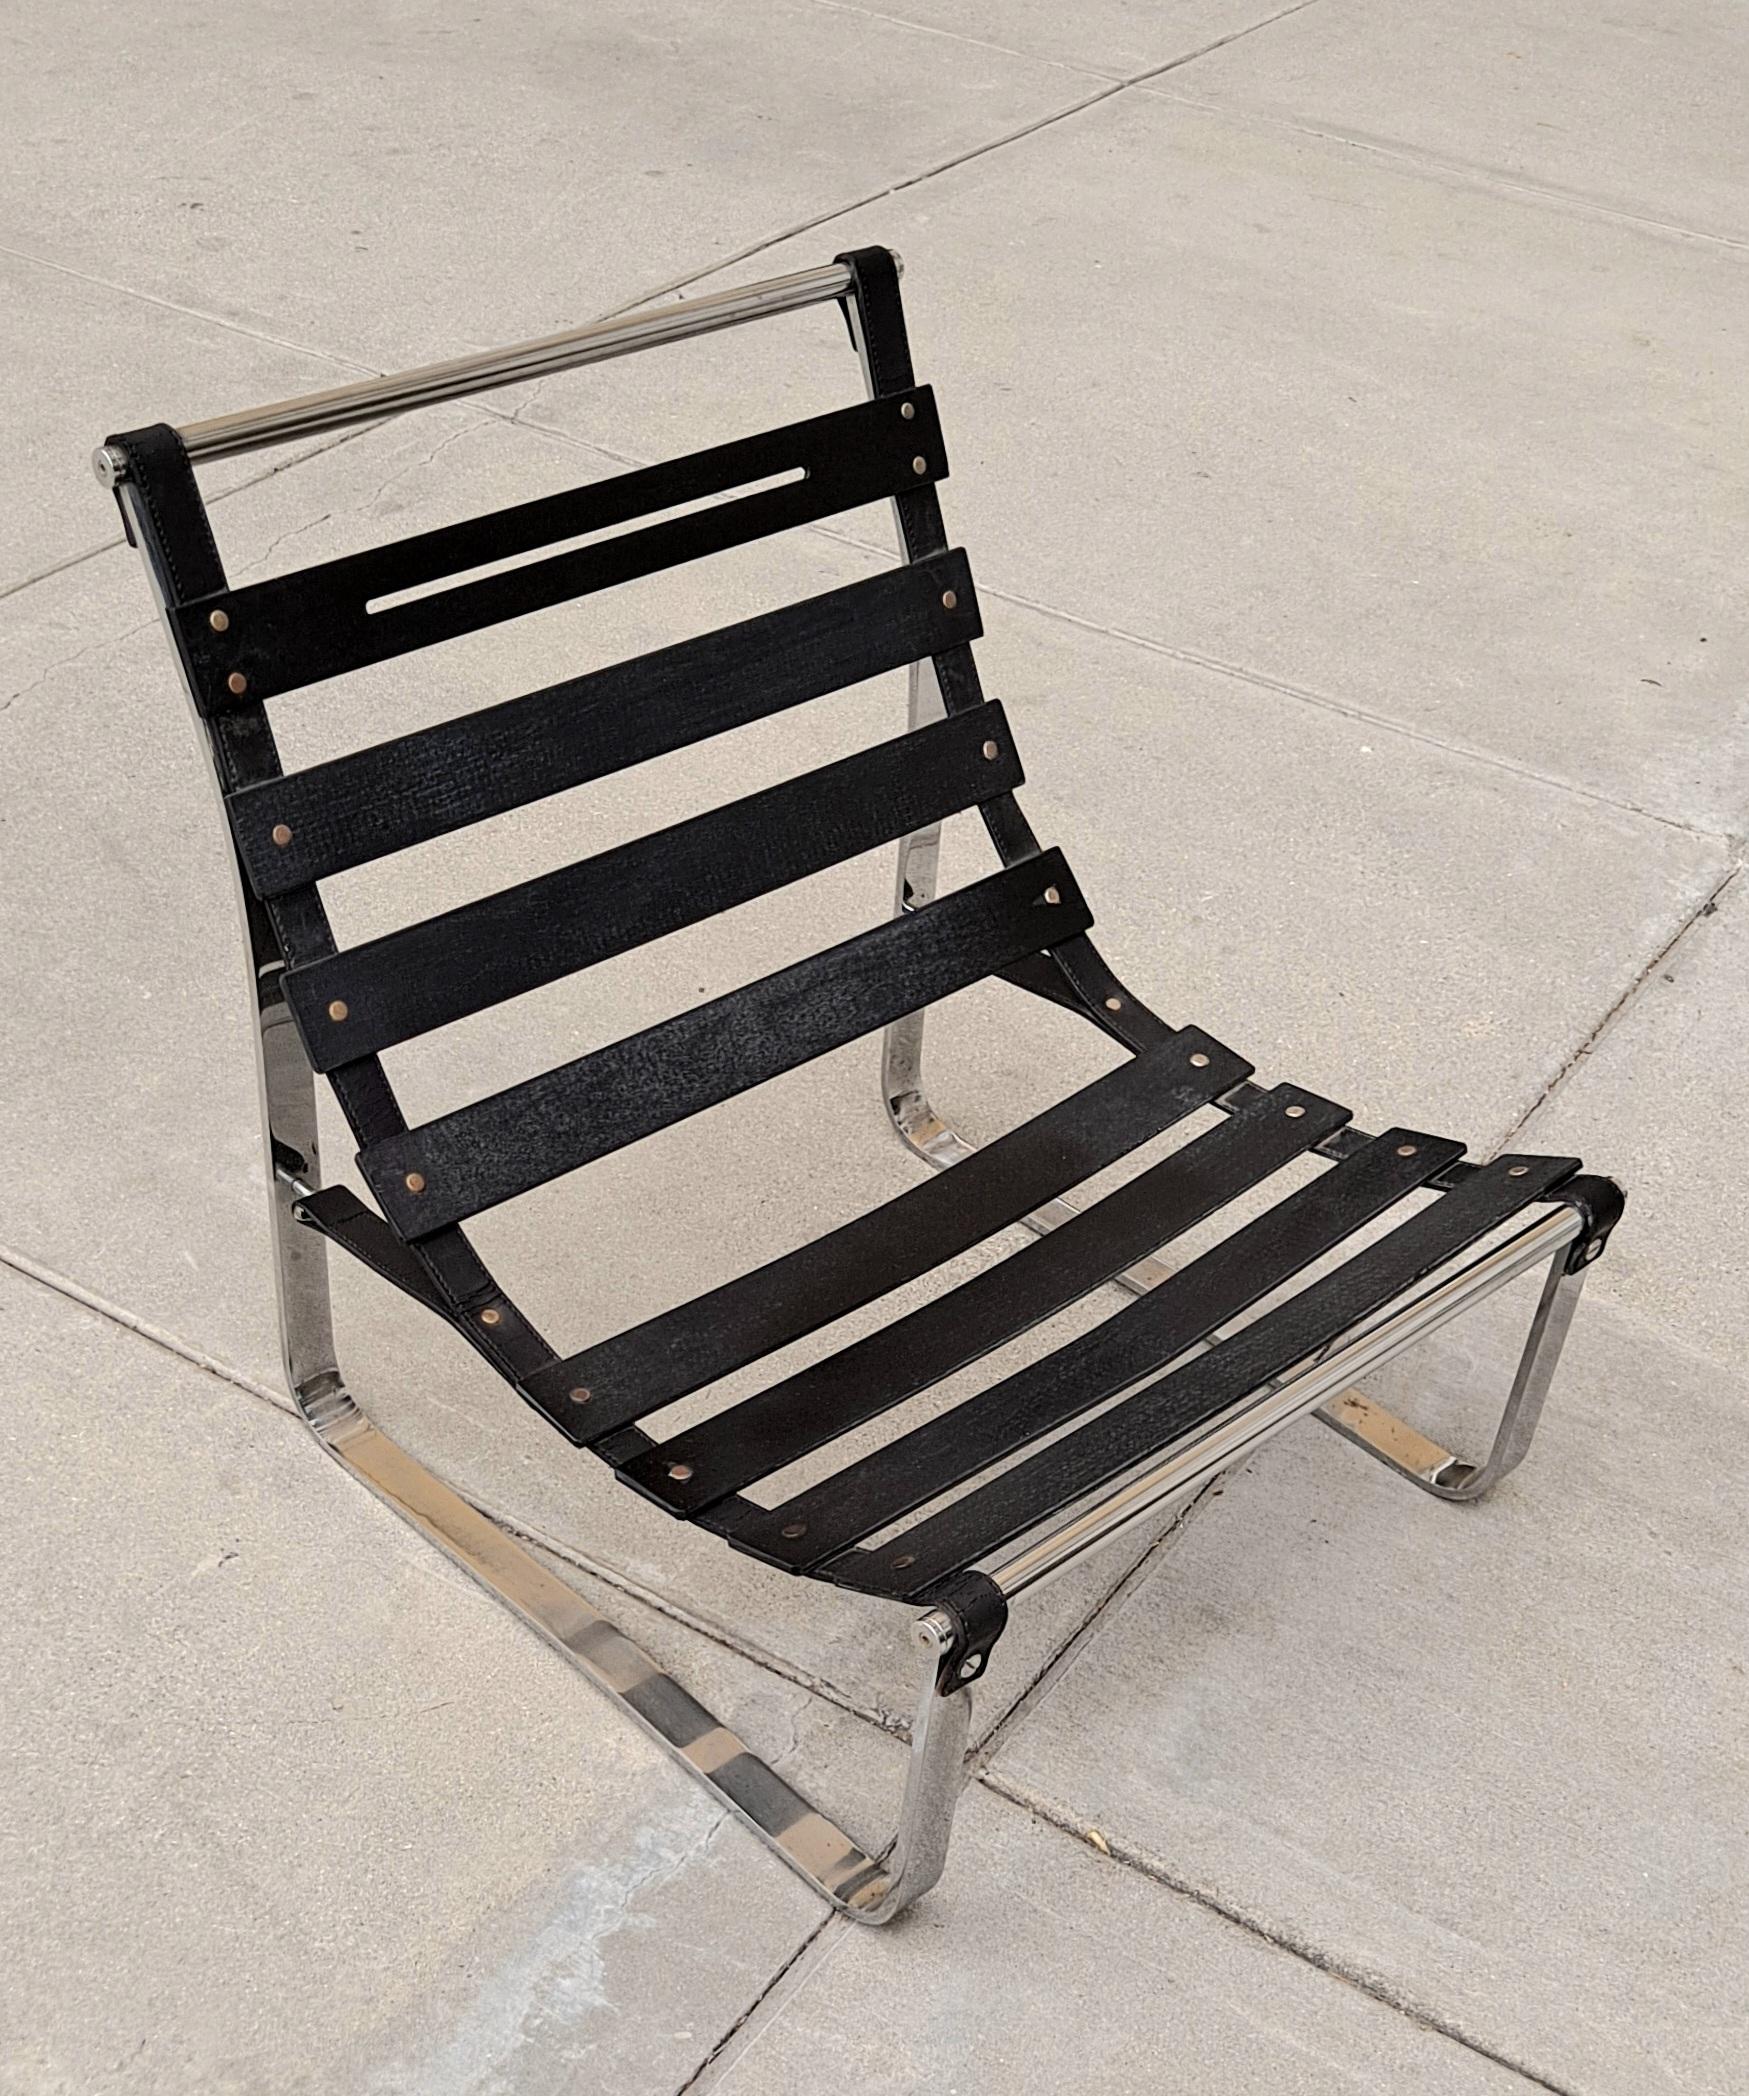 Italian vintage lounge chair design by Ico Parisi produced for MIM Roma during 1960s. The chair has stainless steel and chrome frame with stitched leather supports and seat with black painted wooden slats. The seating and backrest have brand new